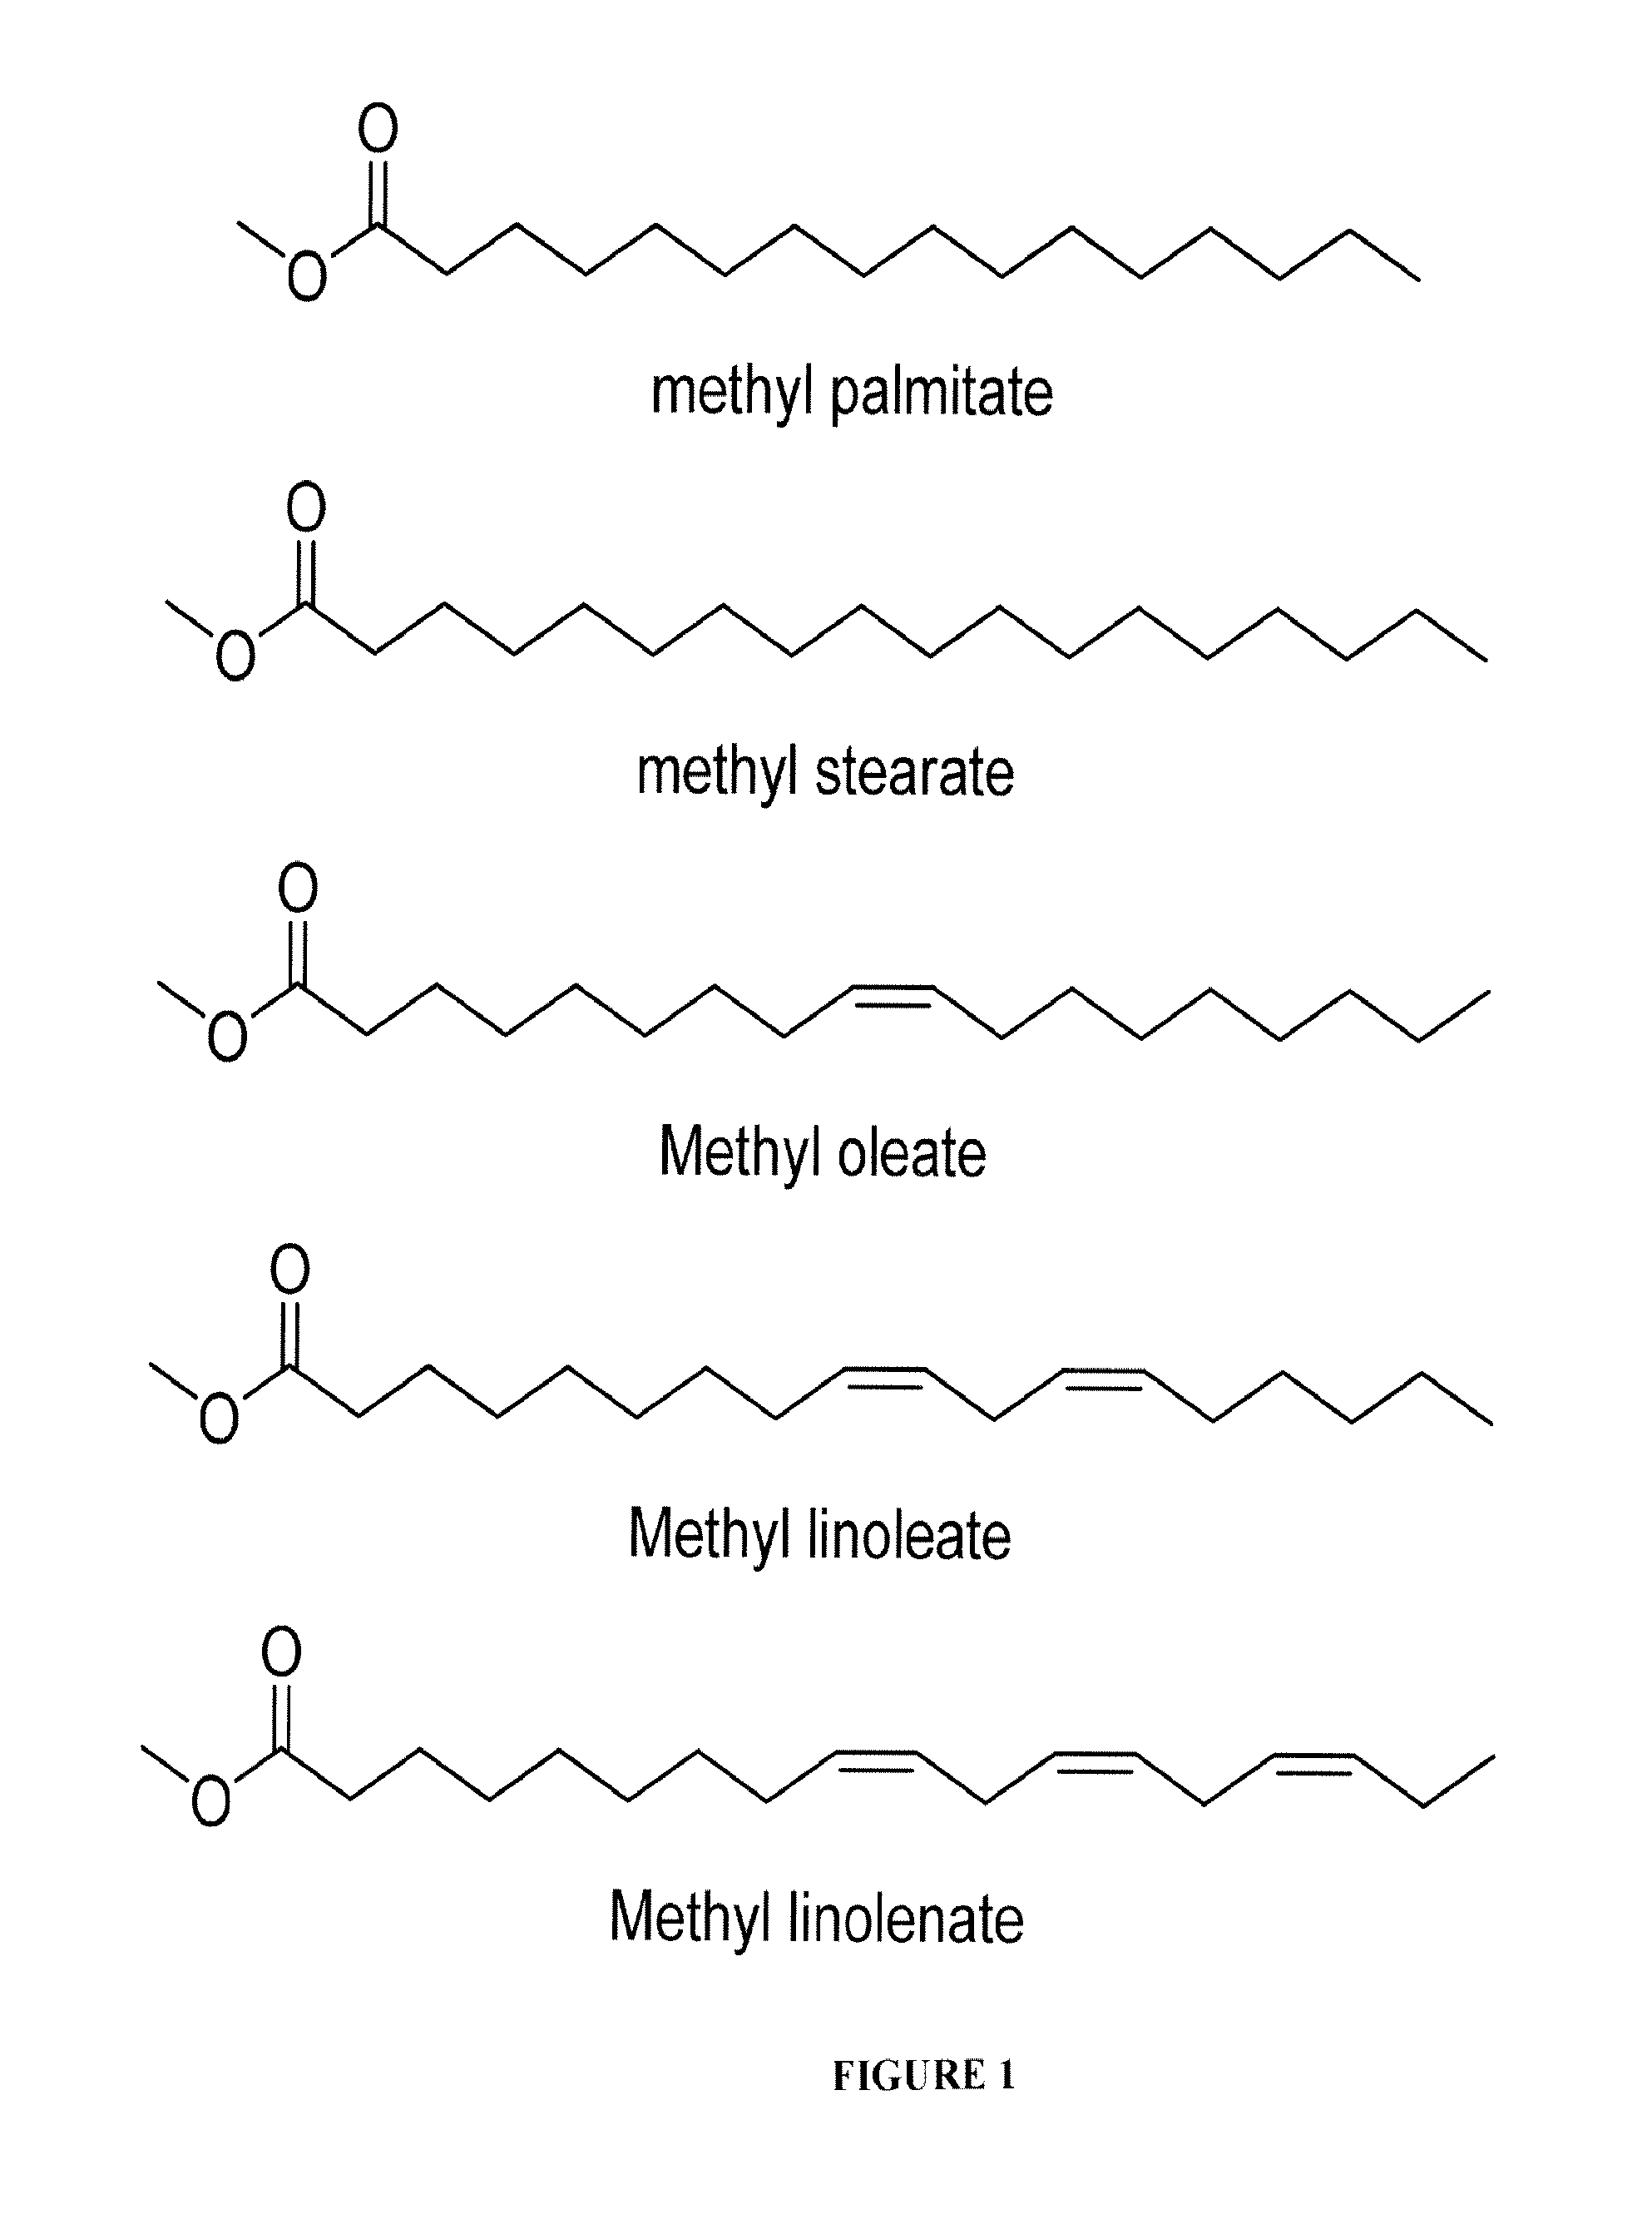 Synthetic ester-based dielectric fluid compositions for enhanced thermal management